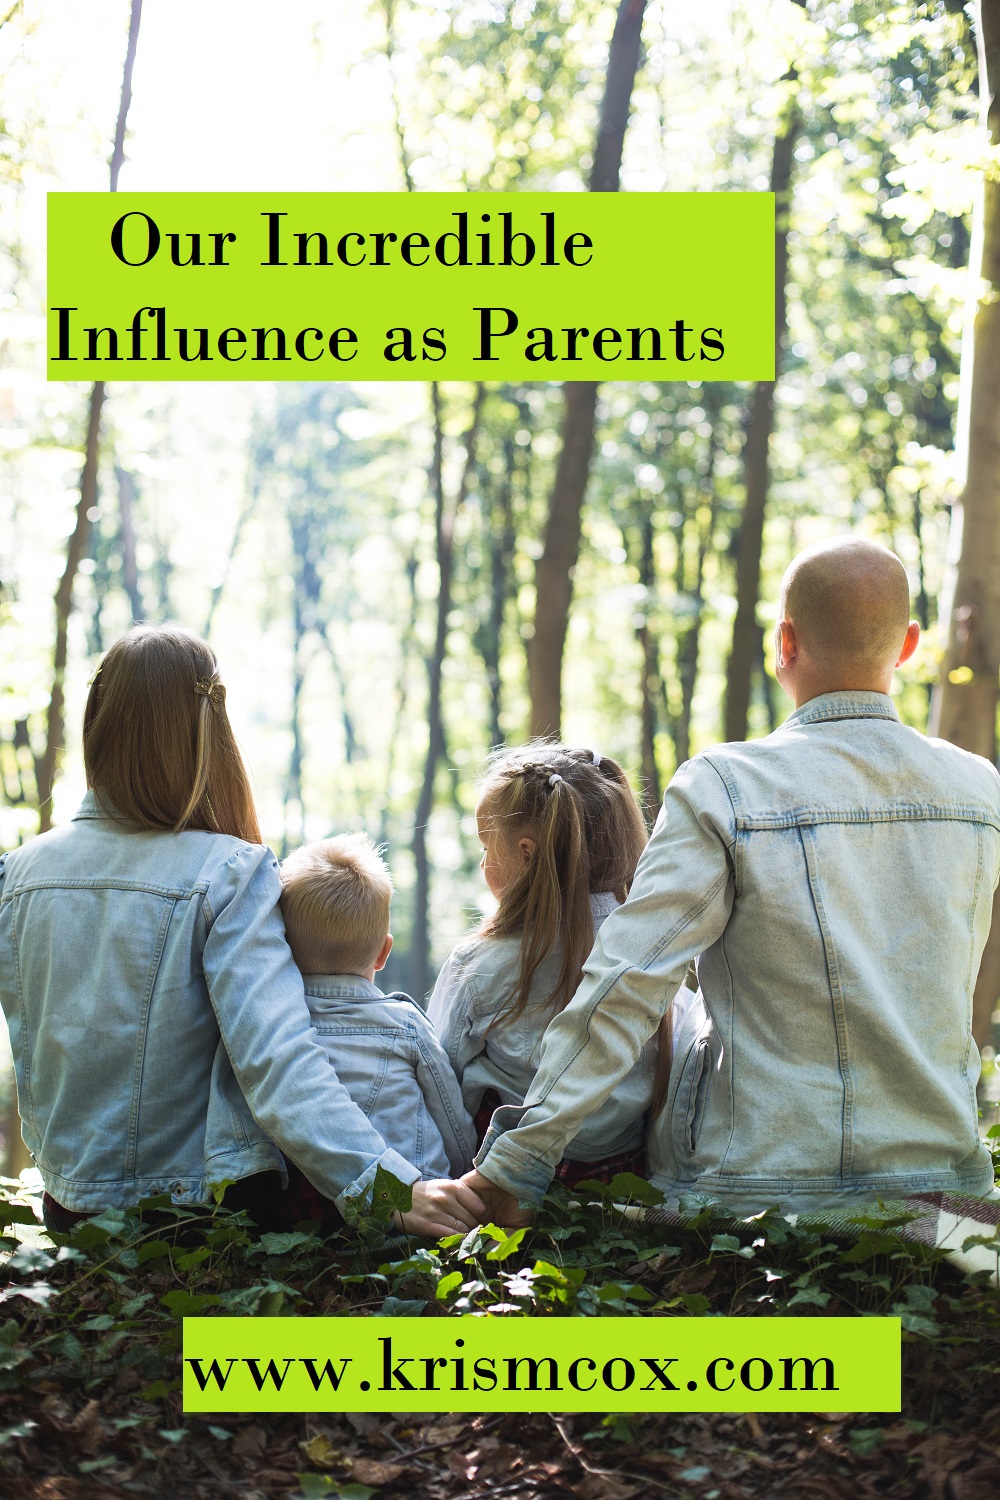 7 Ways to Be a Godly Influence on Your Children